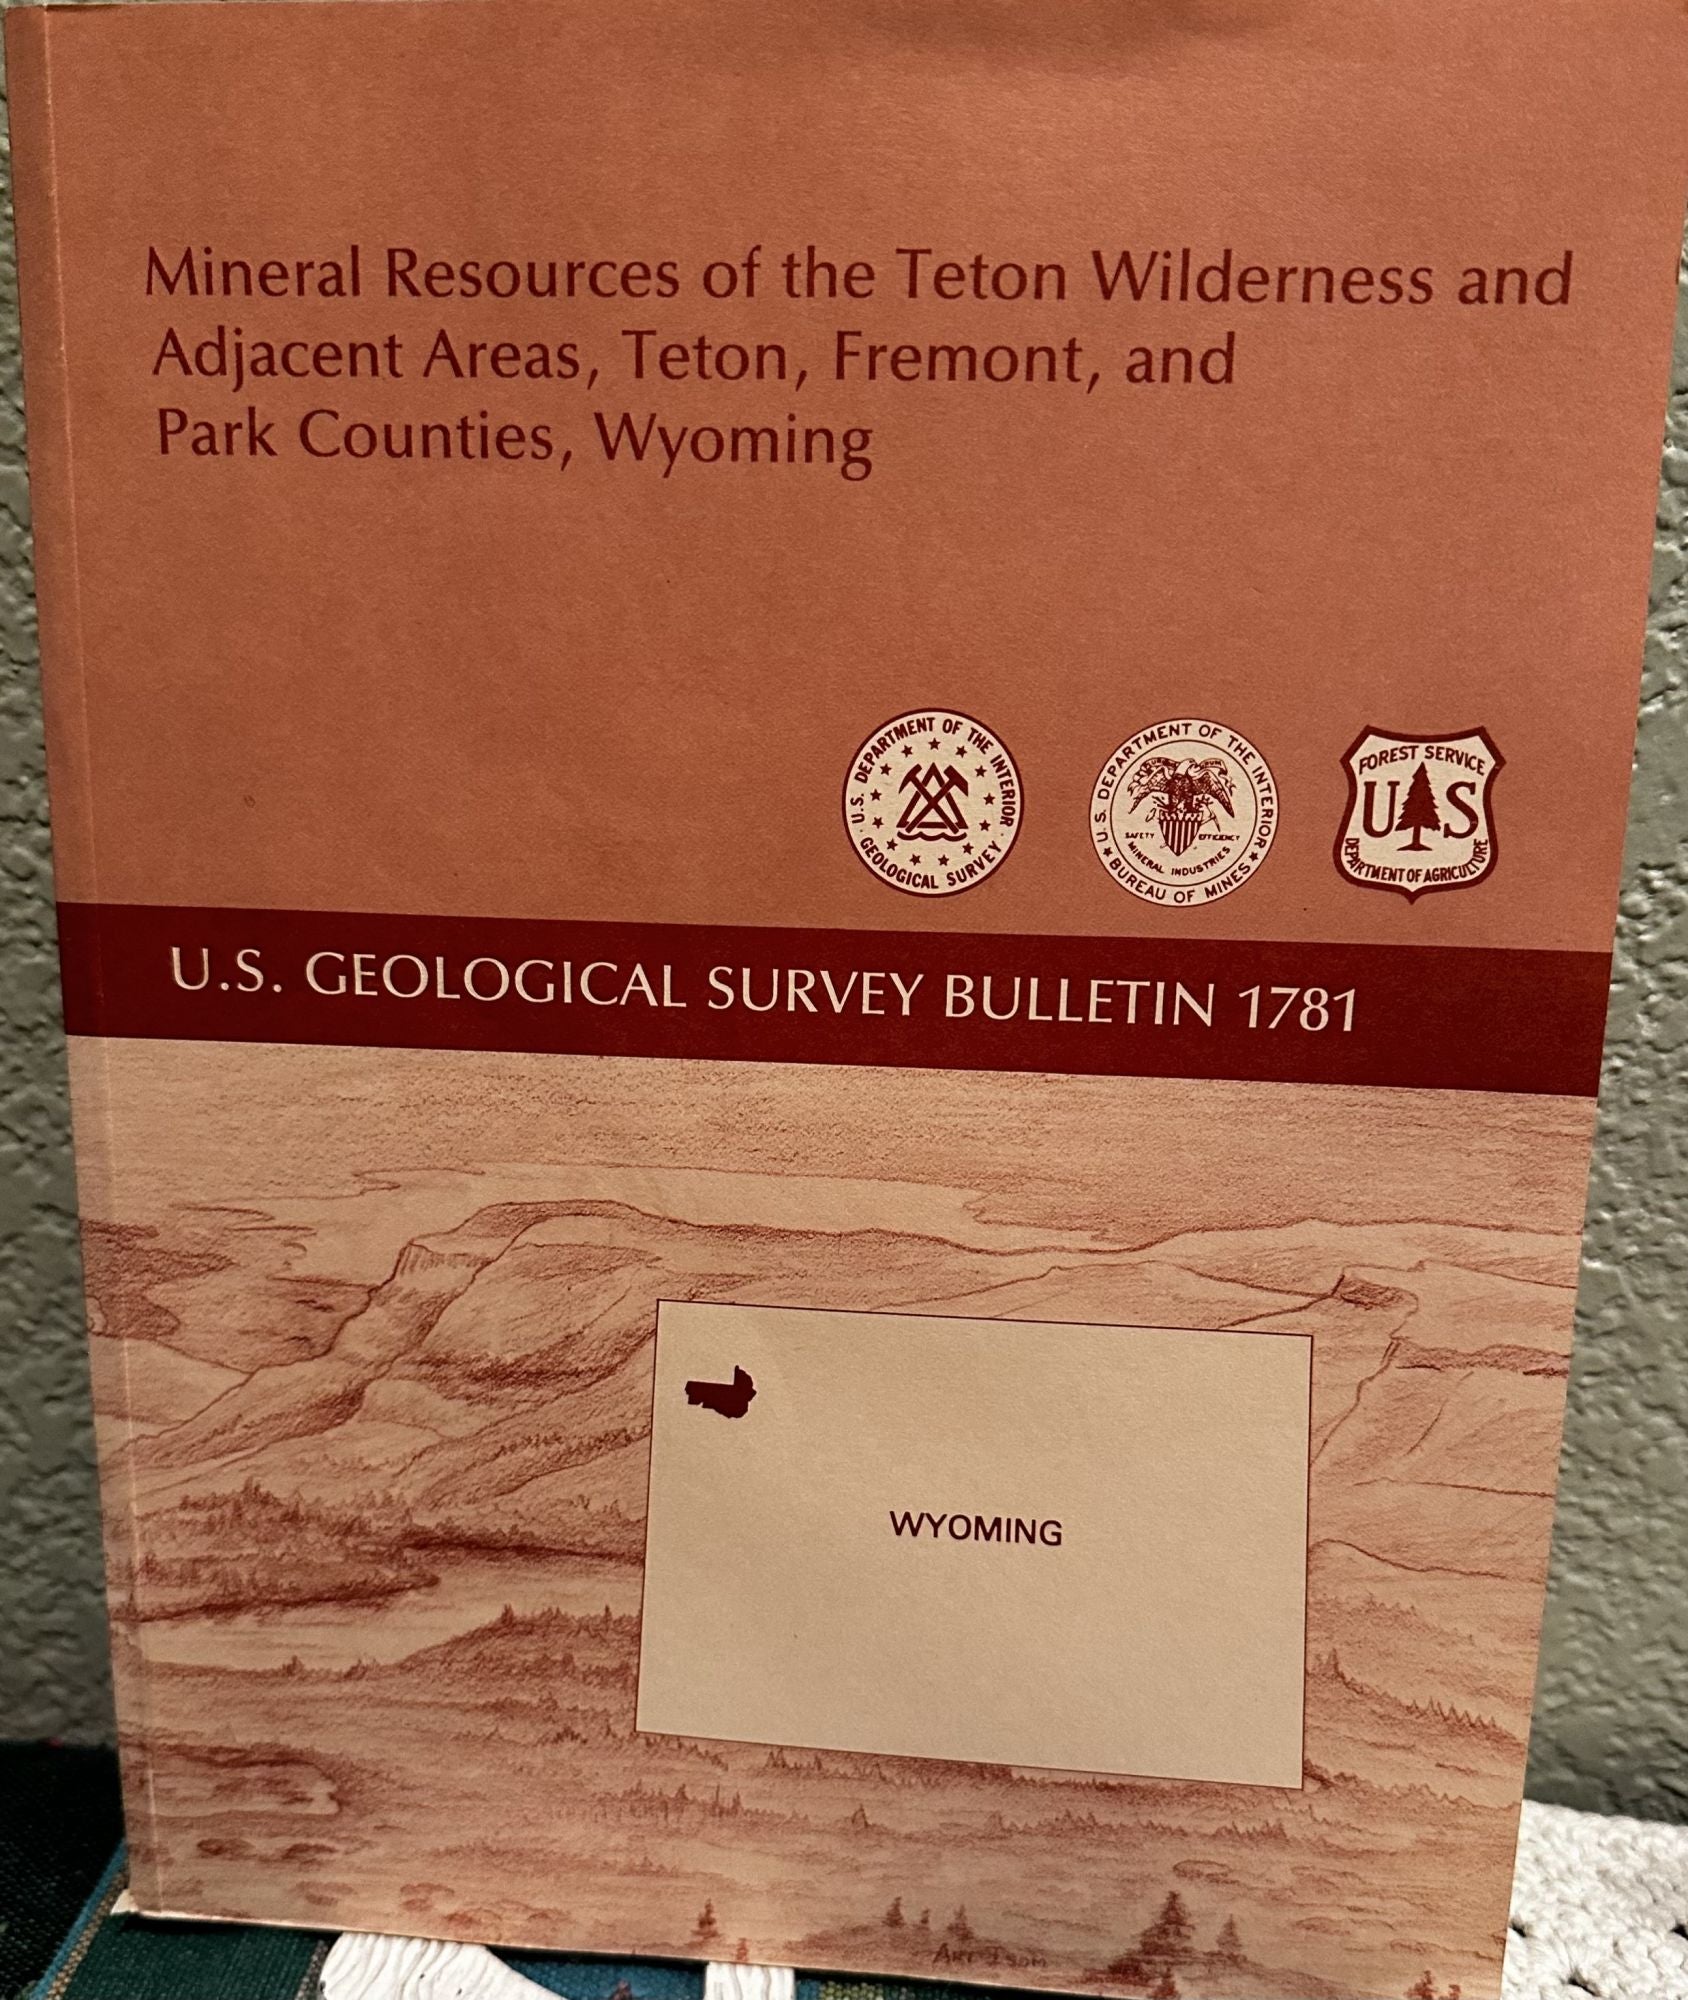 Mineral Resources of the Teton Wilderness and Adjacent Areas, Teton, Fremont, and Park Counties, J. C. Antweiler.